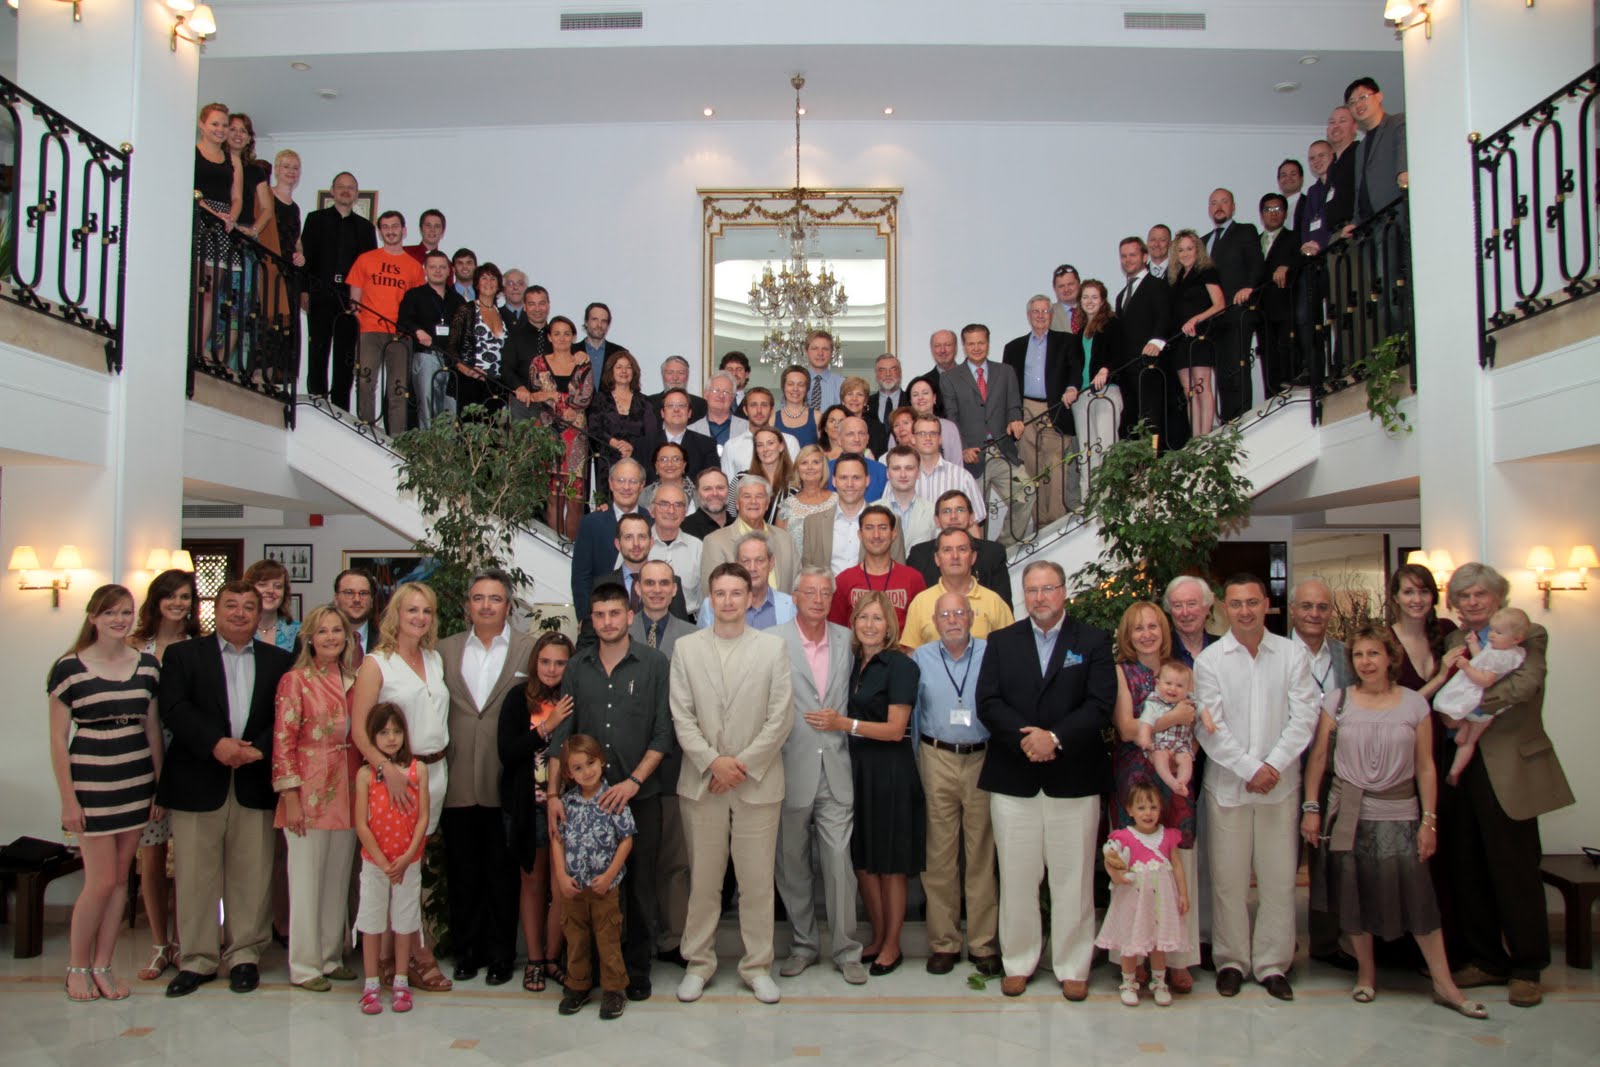 Group photo from the Fifth Annual Meeting, May 29, 2011, Hotel Karia Princess, Bodrum